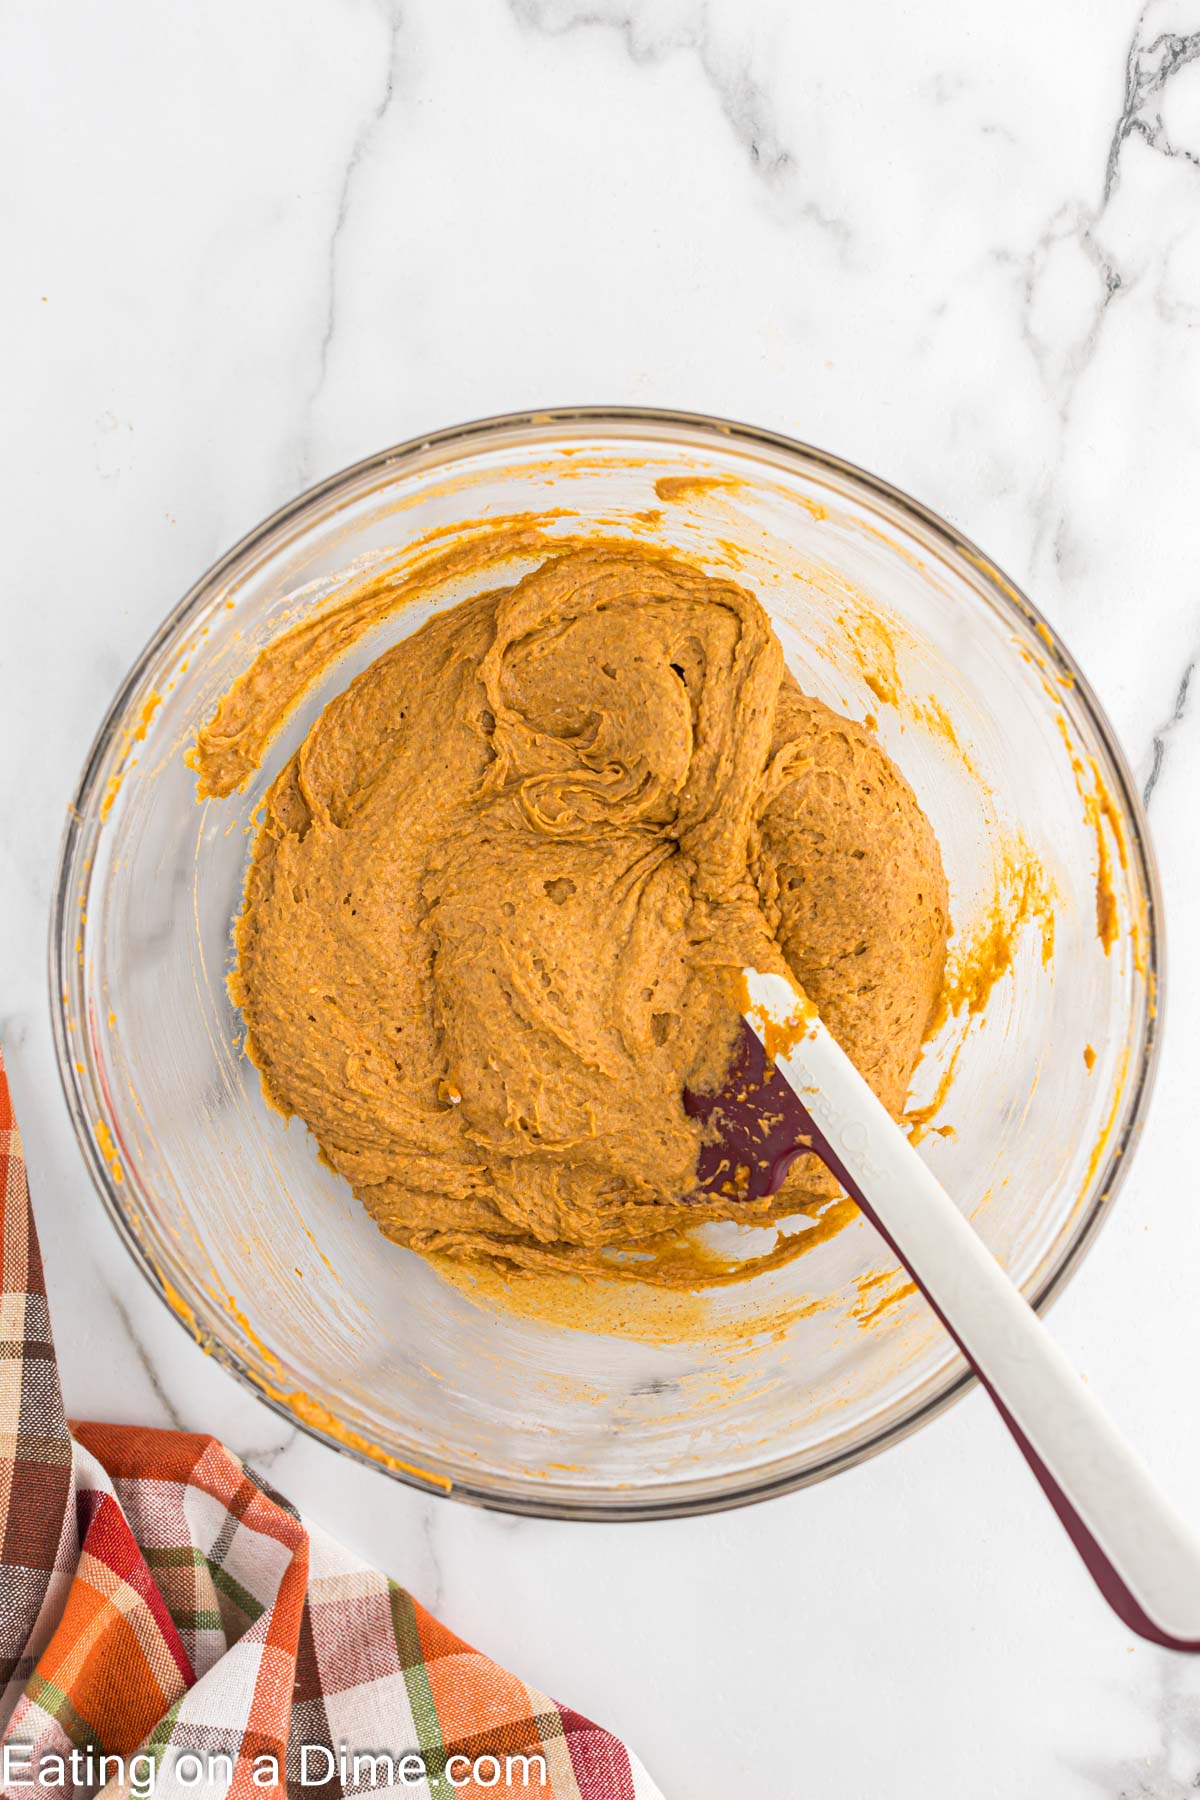 Combining the pumpkin cupcake ingredients in a bowl with a spoon